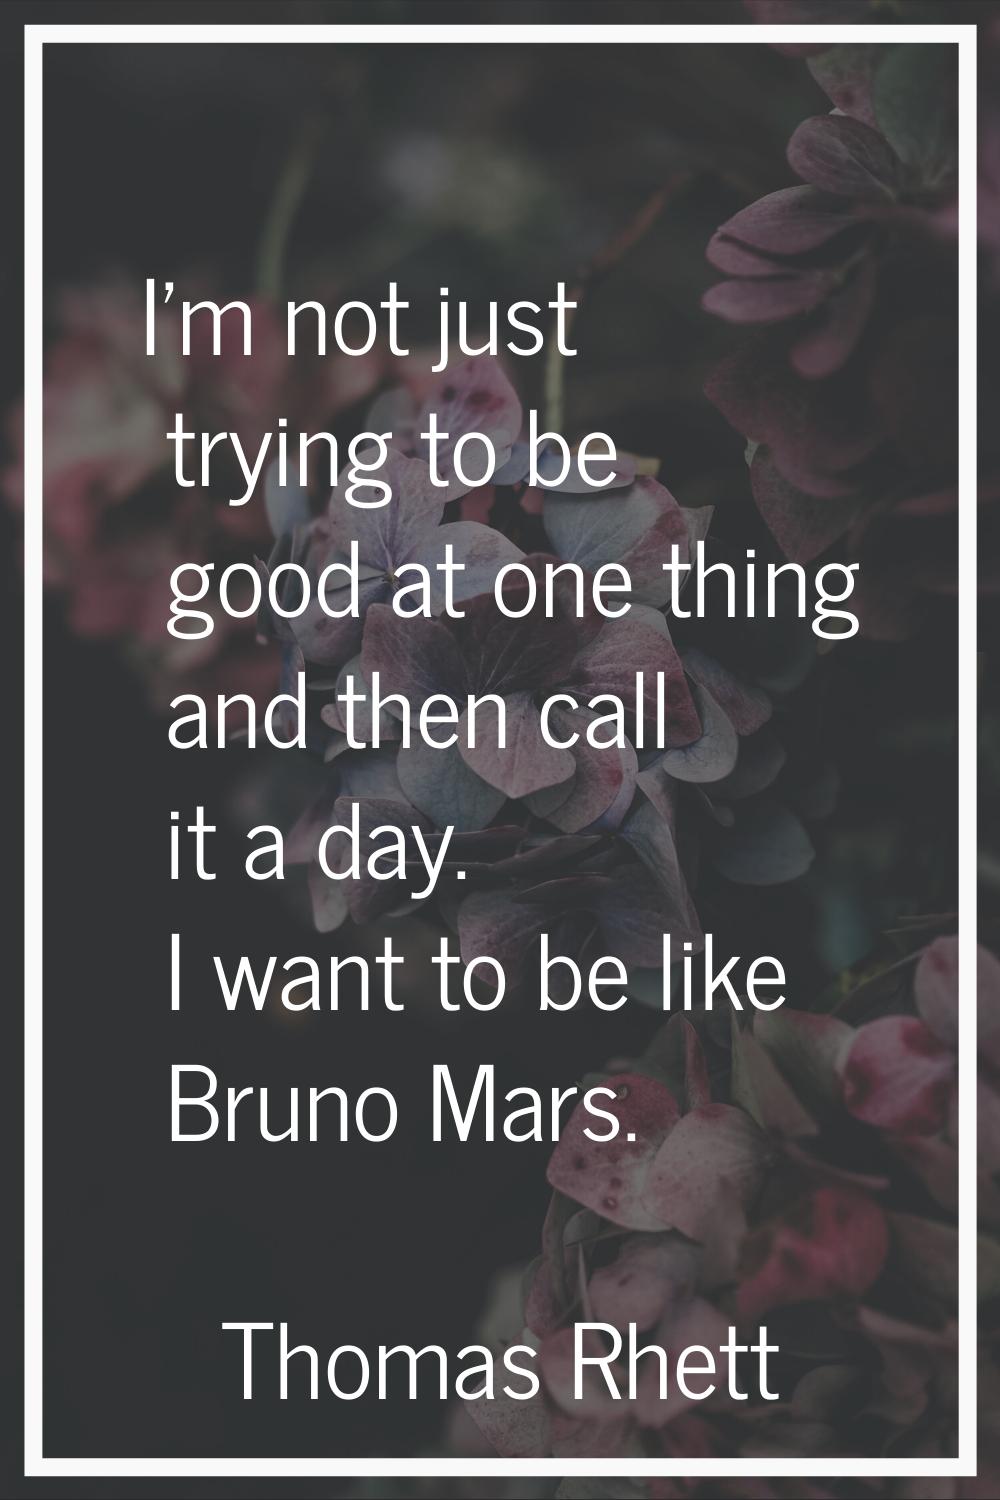 I'm not just trying to be good at one thing and then call it a day. I want to be like Bruno Mars.